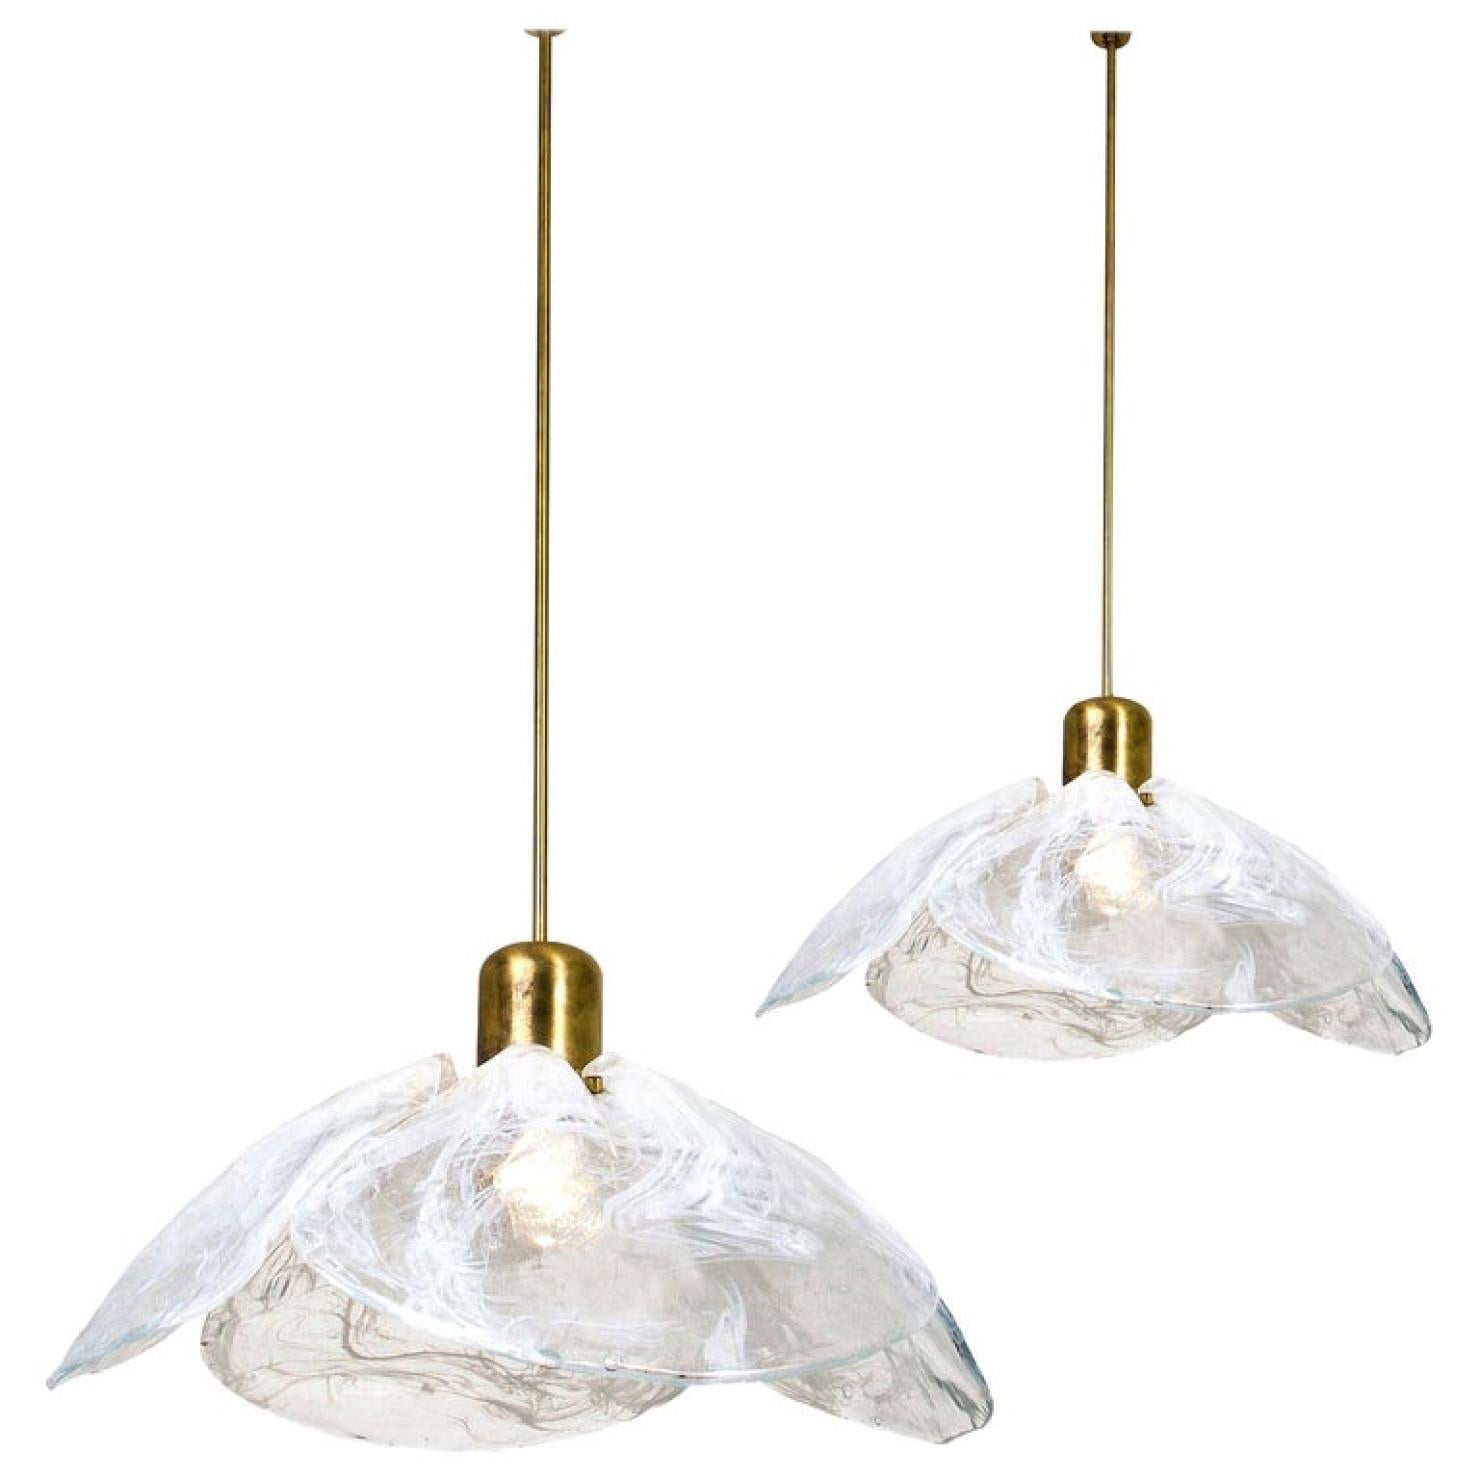 Two beautiful high quality midcentury brass chandeliers with four melting glass panels in the shape of a flower. Designed and executed by Kalmar Vienna in the 1970s. Made of hand blown melting clear and white glass.

Cleaned and well-wired, in full